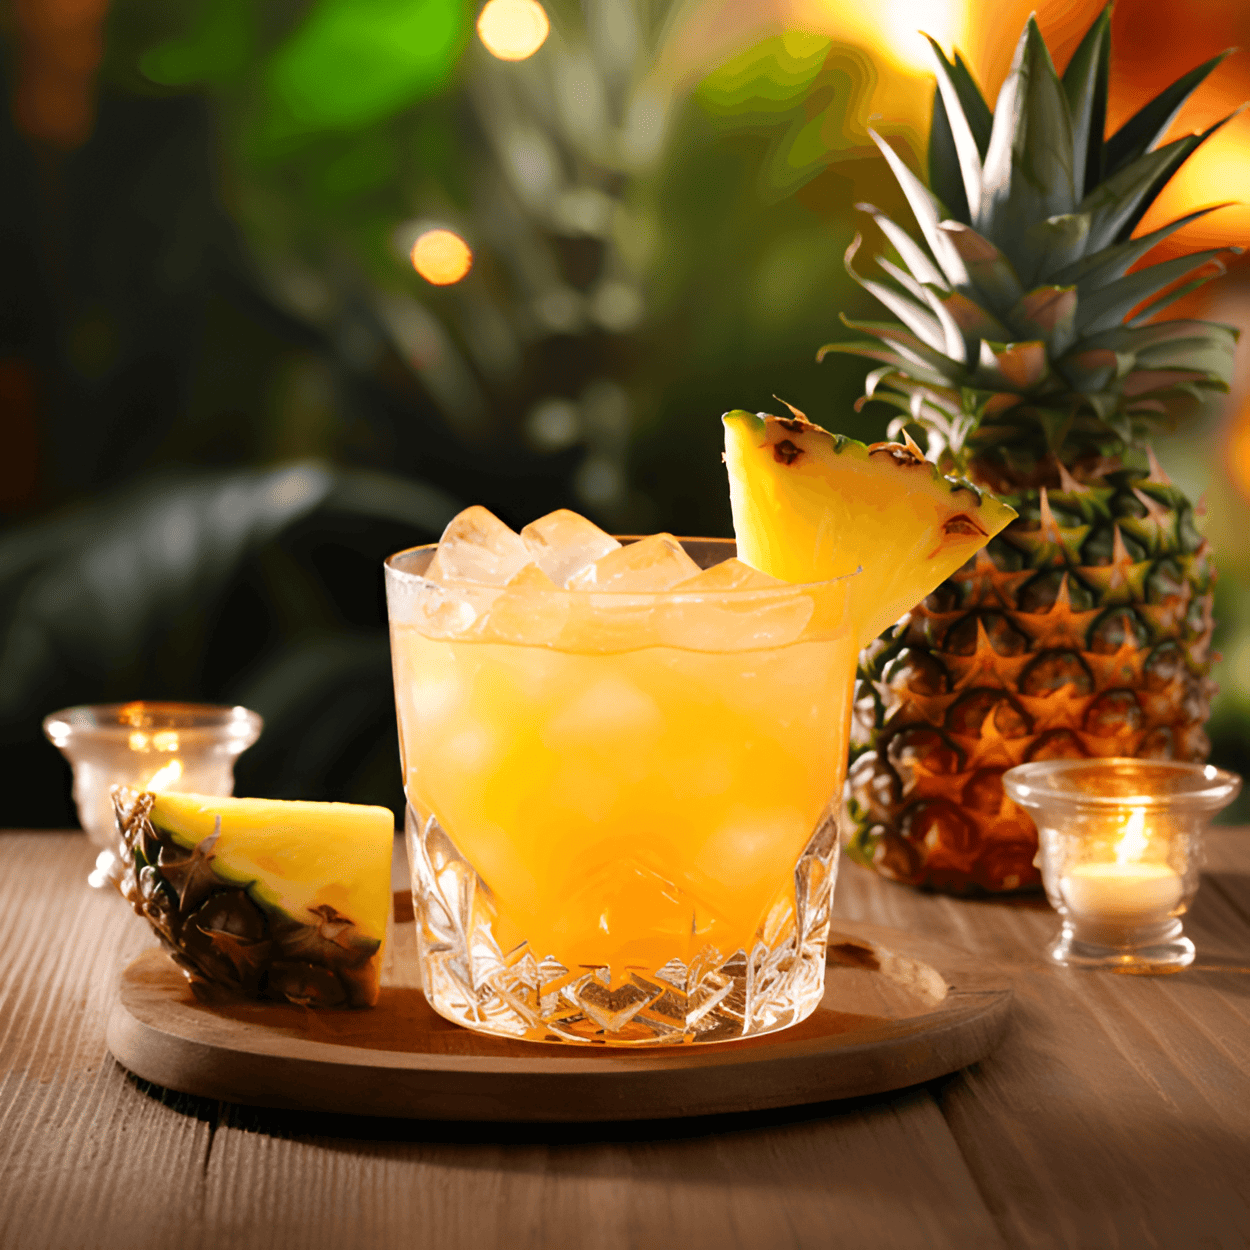 Urine Sample Cocktail Recipe - The Urine Sample cocktail is a delightful blend of sweet and sour, with the peach schnapps providing a fruity sweetness that's balanced by the tartness of the pineapple juice. The vodka adds a kick, making this a strong yet refreshing cocktail.